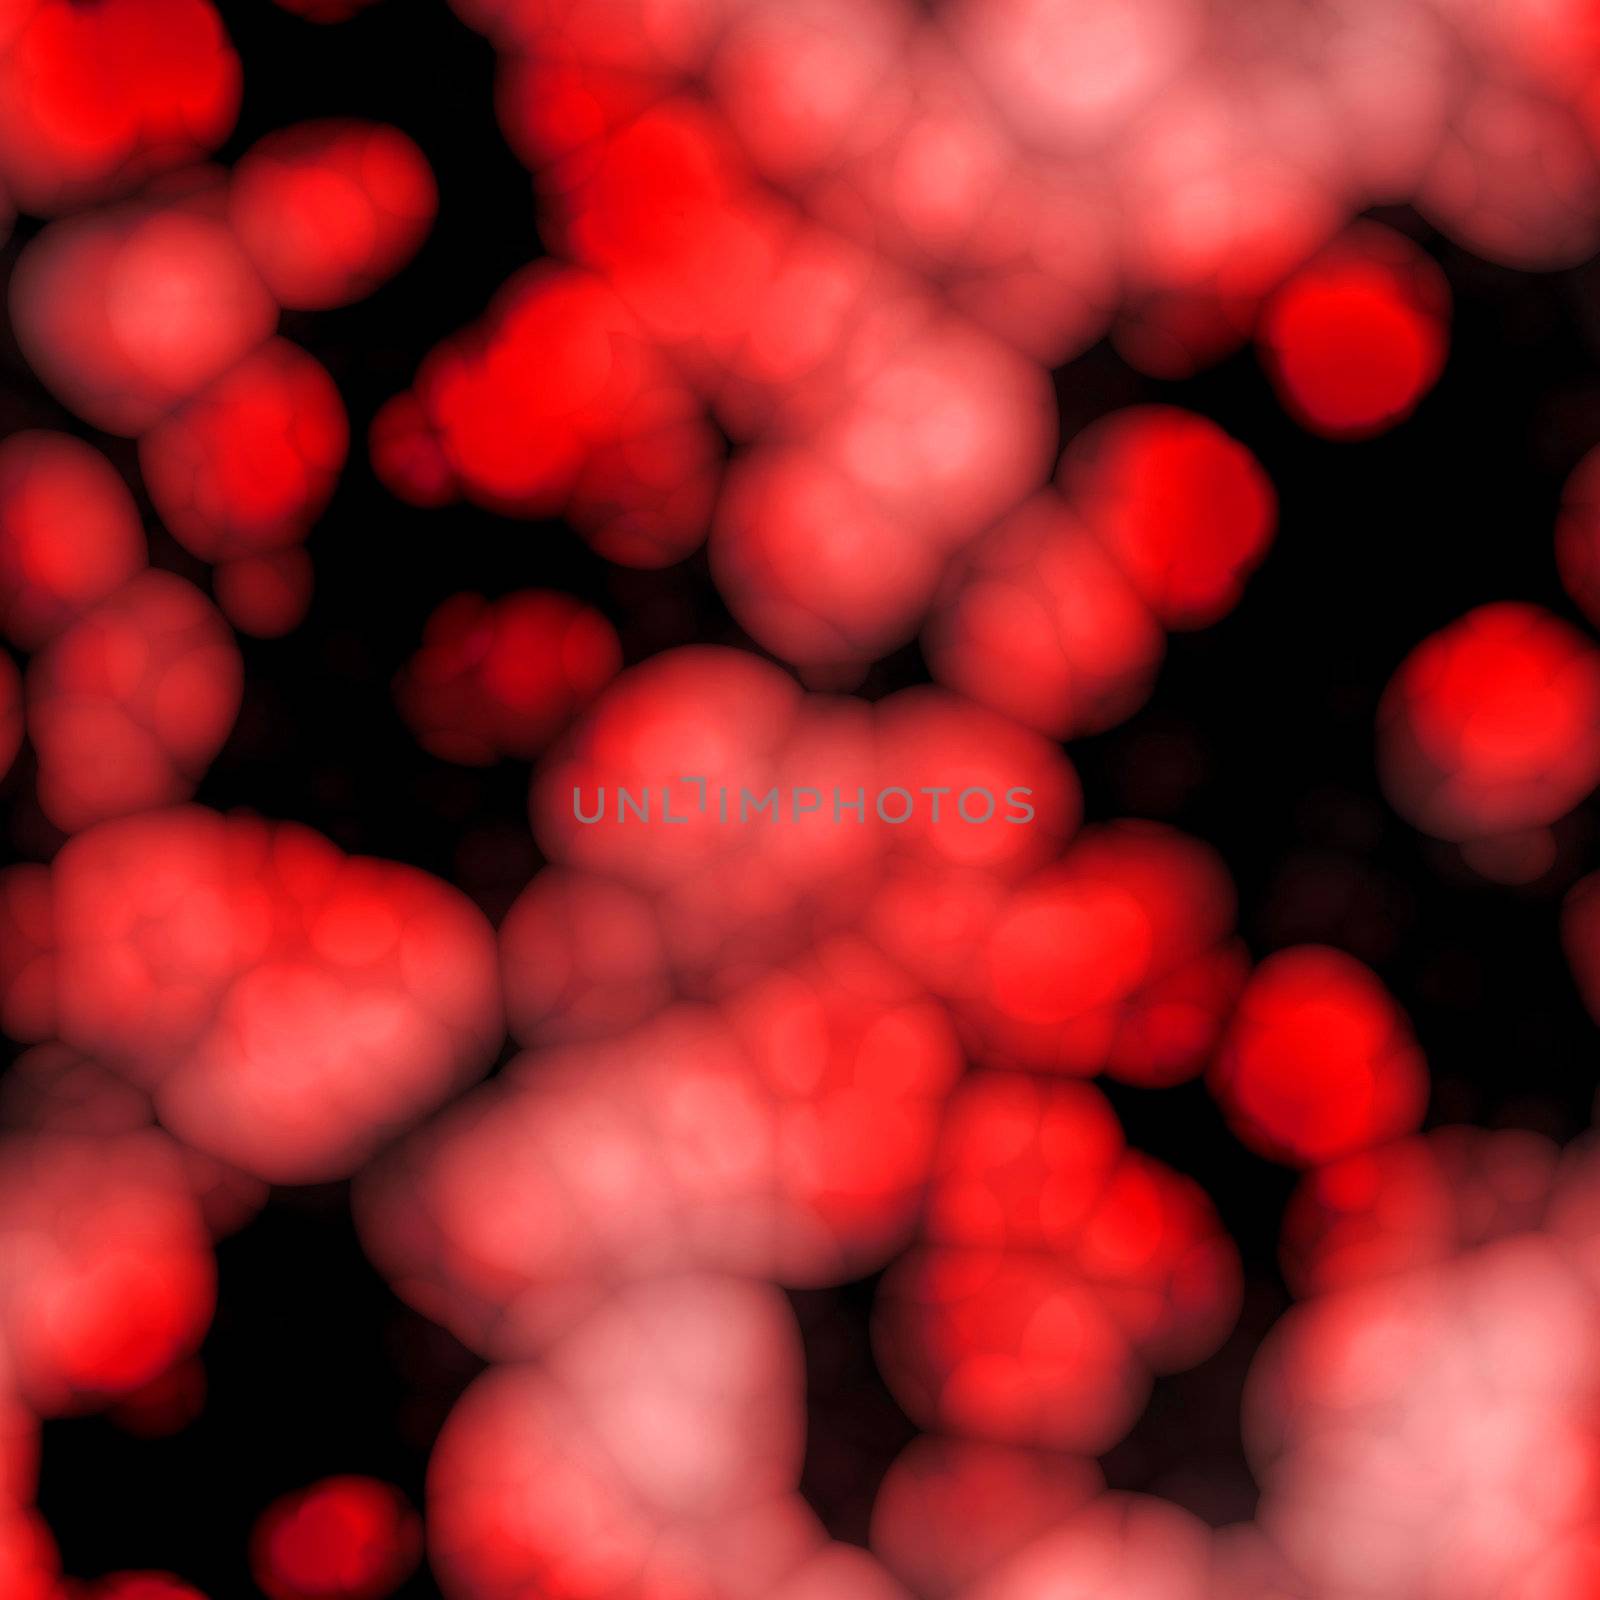 A 3d render of some blood cells or plasma isolated over black.